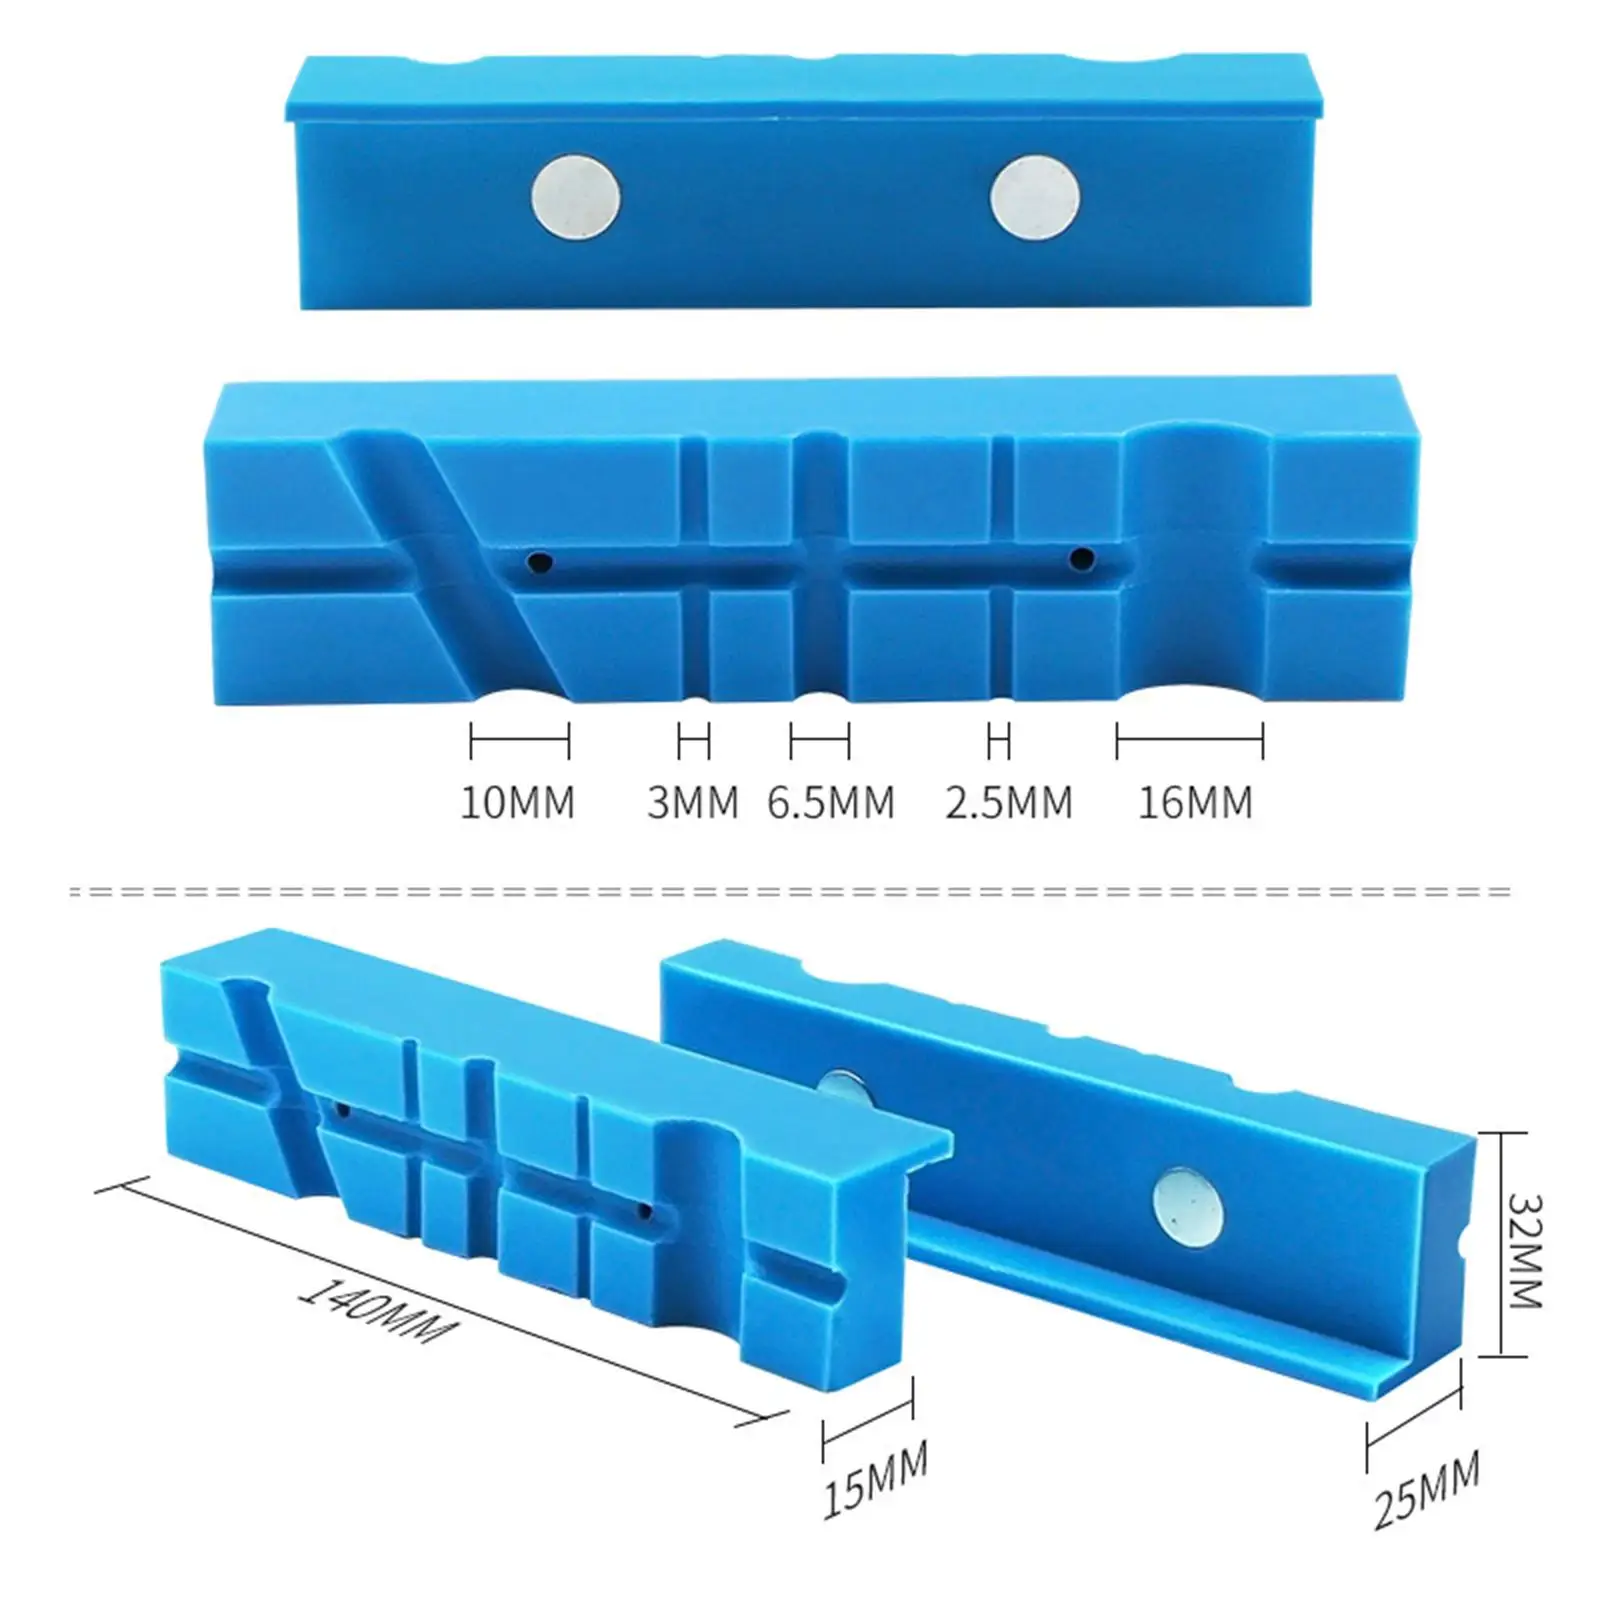 2 Pieces Multi-Groove Bench Vise Jaw Pads Vise Holder Protective Covers Protectors for Woodworking Vices Any Metal Vice